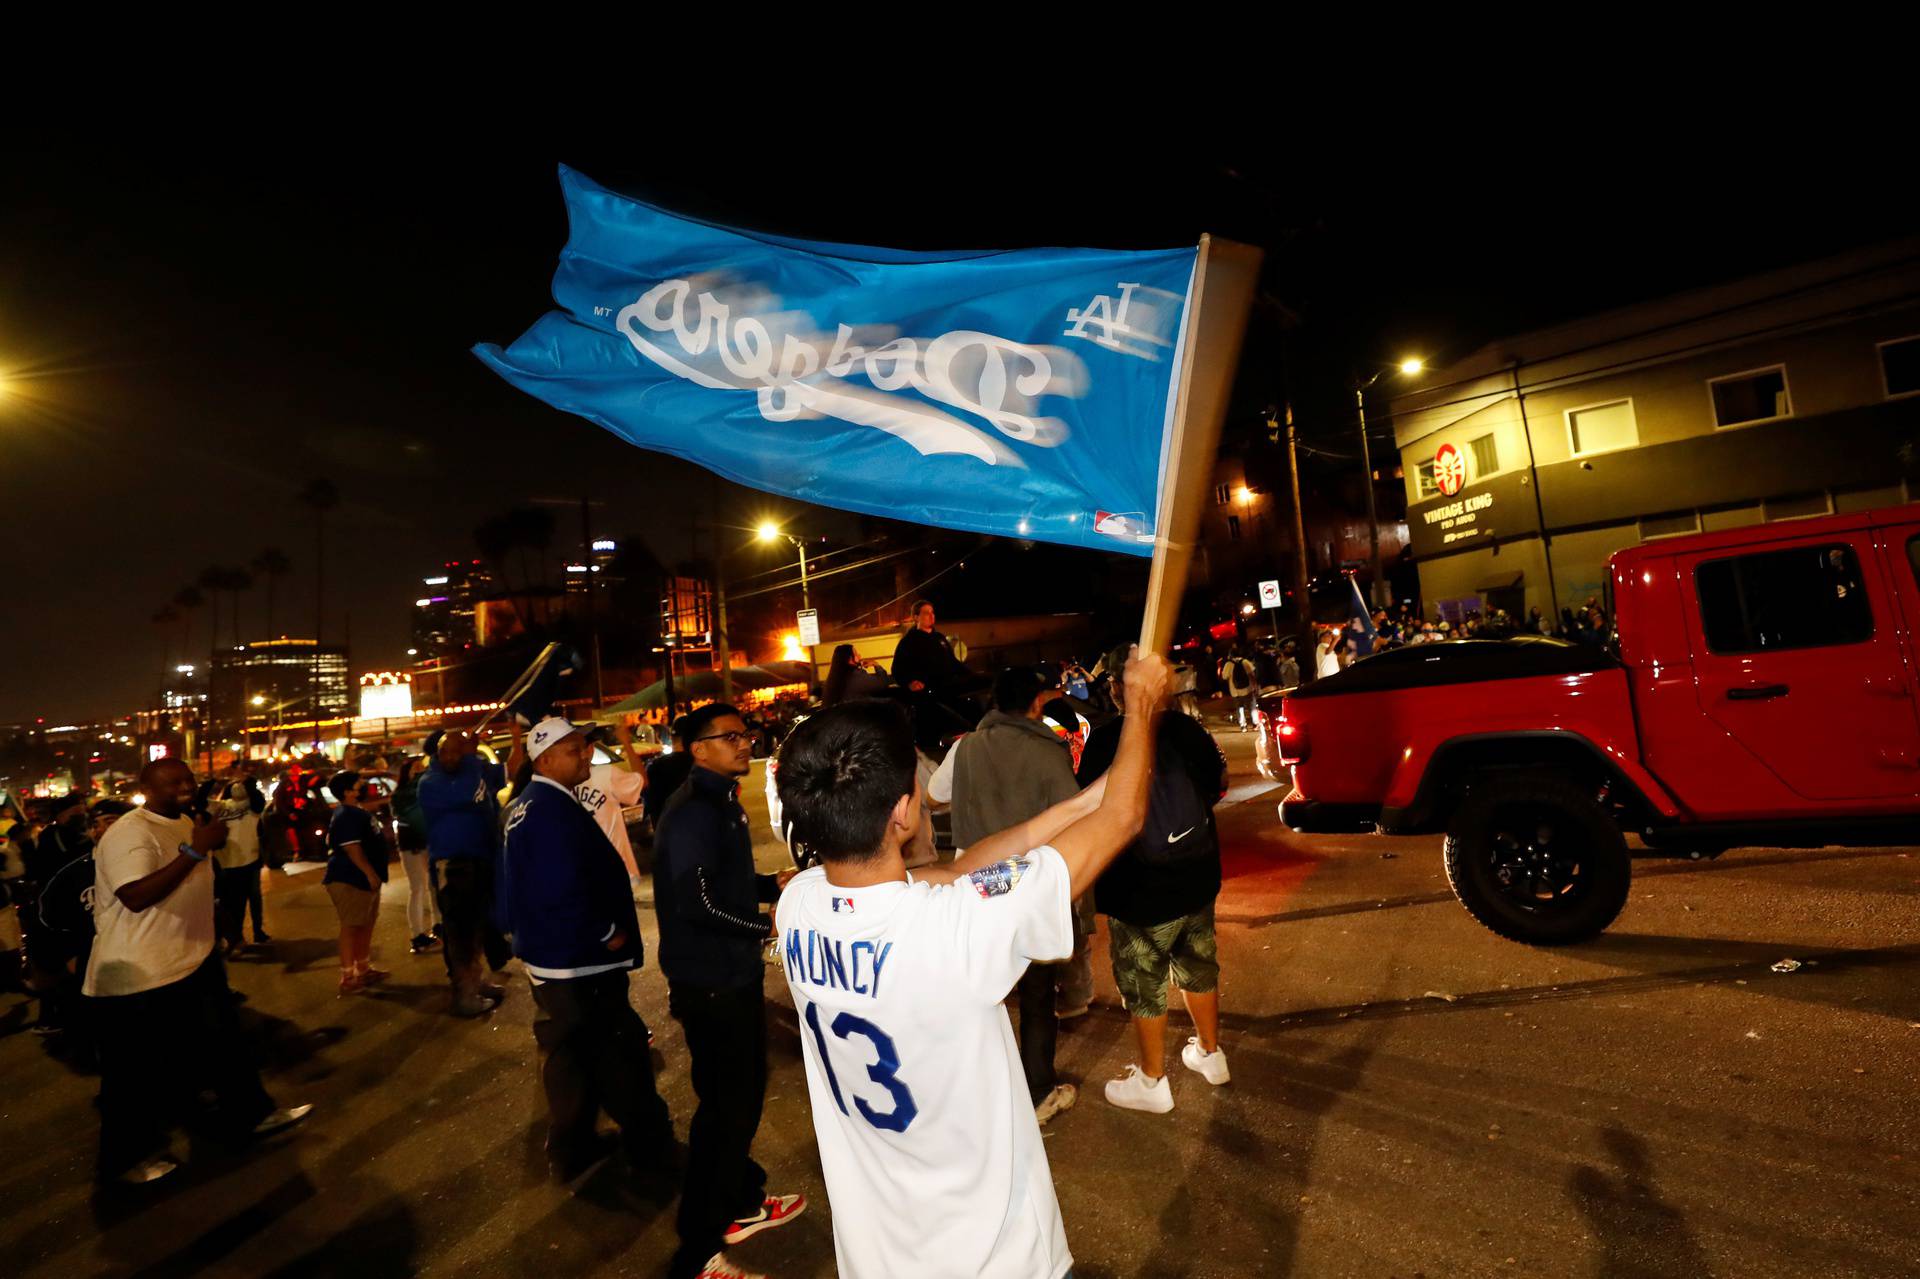 People celebrate Los Angeles Dodgers' victory at the end of game 6 of the 2020 World Series between Los Angeles Dodgers and Tampa Bay Rays, in Los Angeles, California